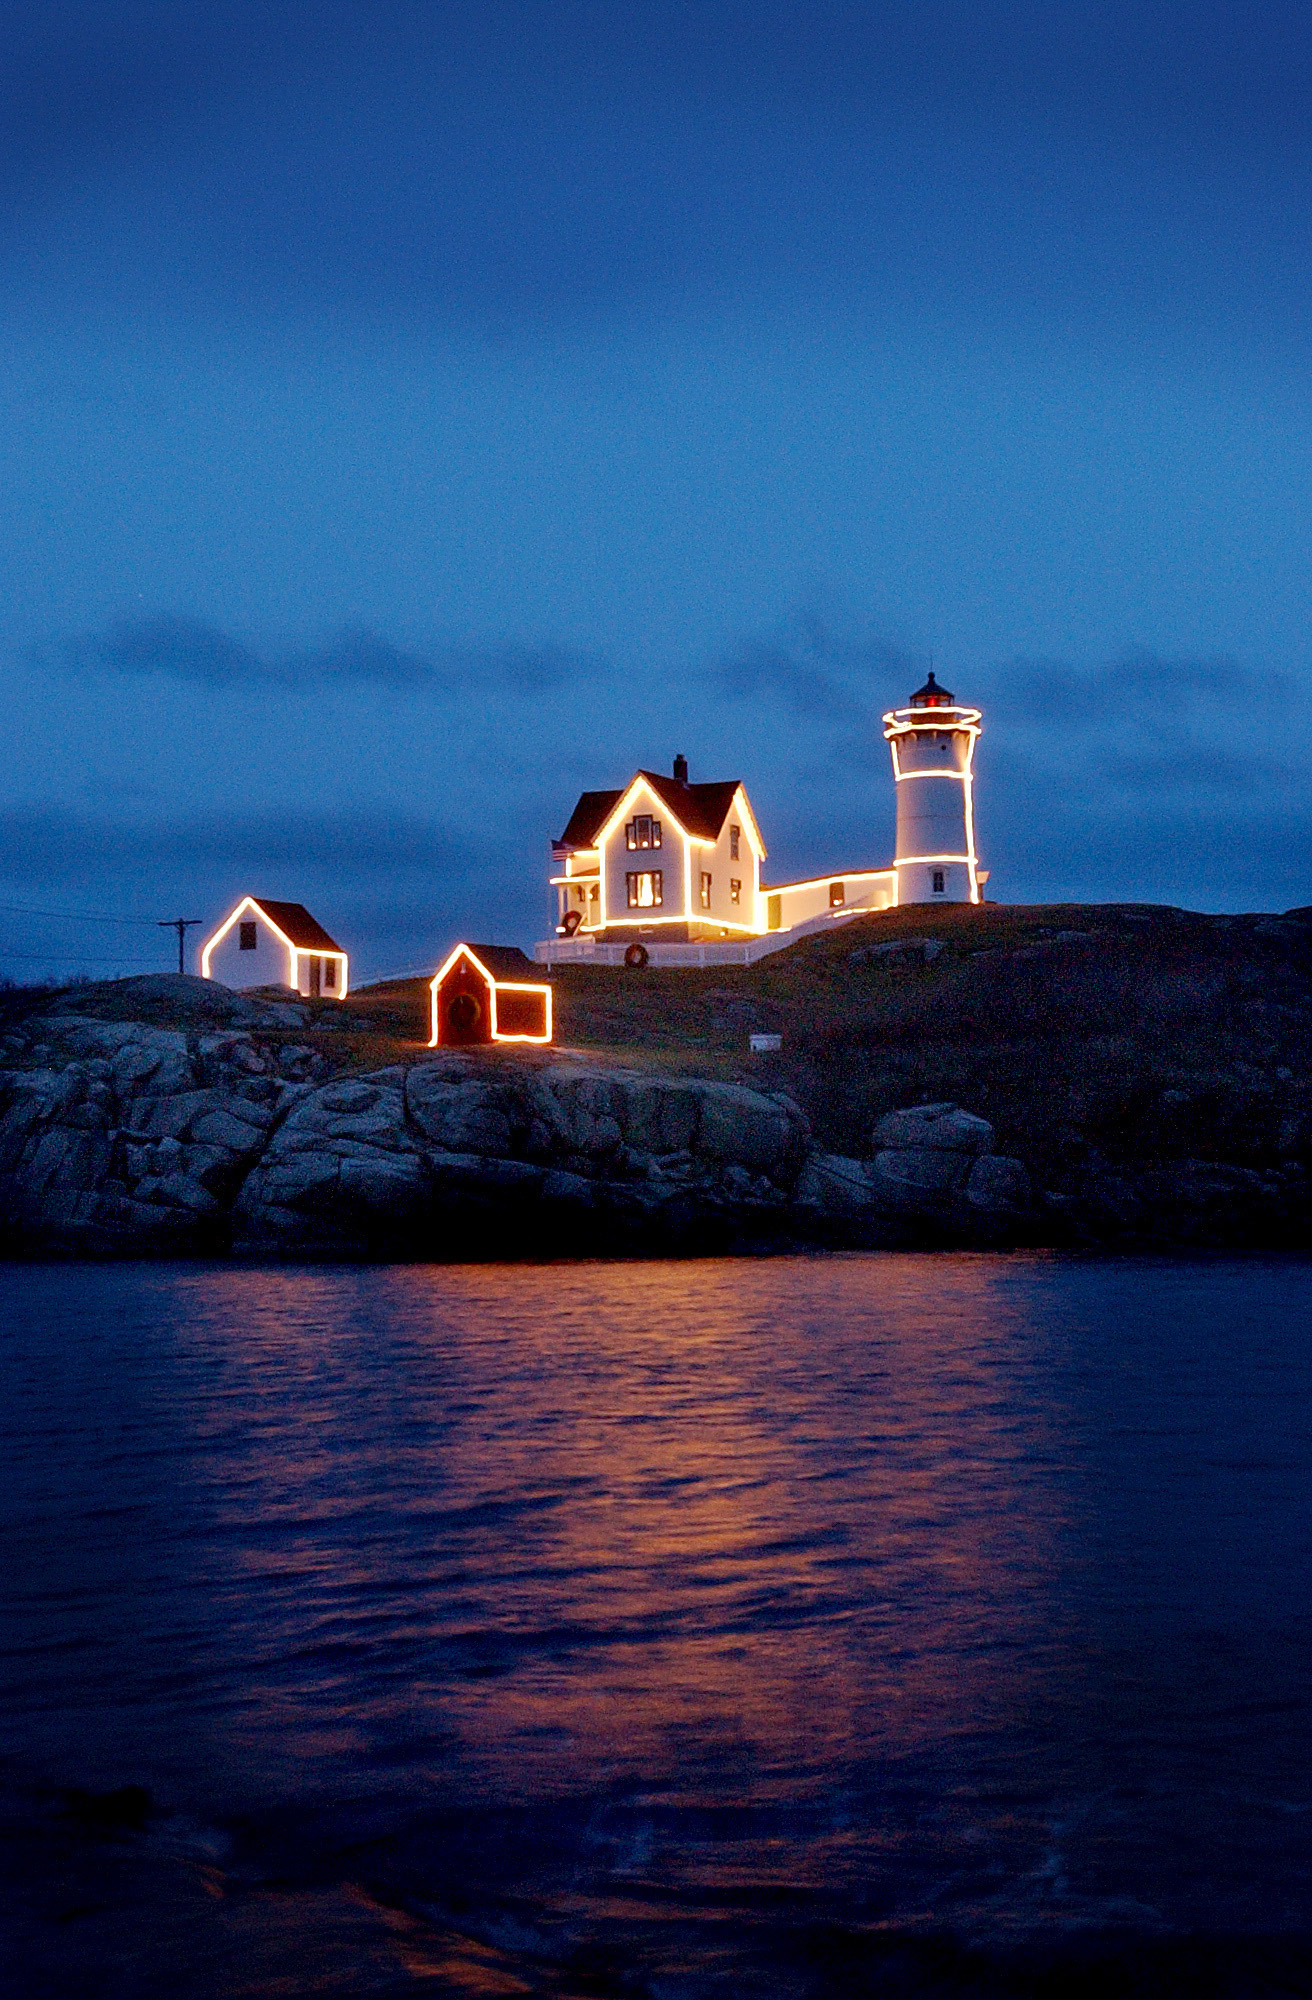 The lighting of the Nubble Lighthouse in York Beach Maine truly